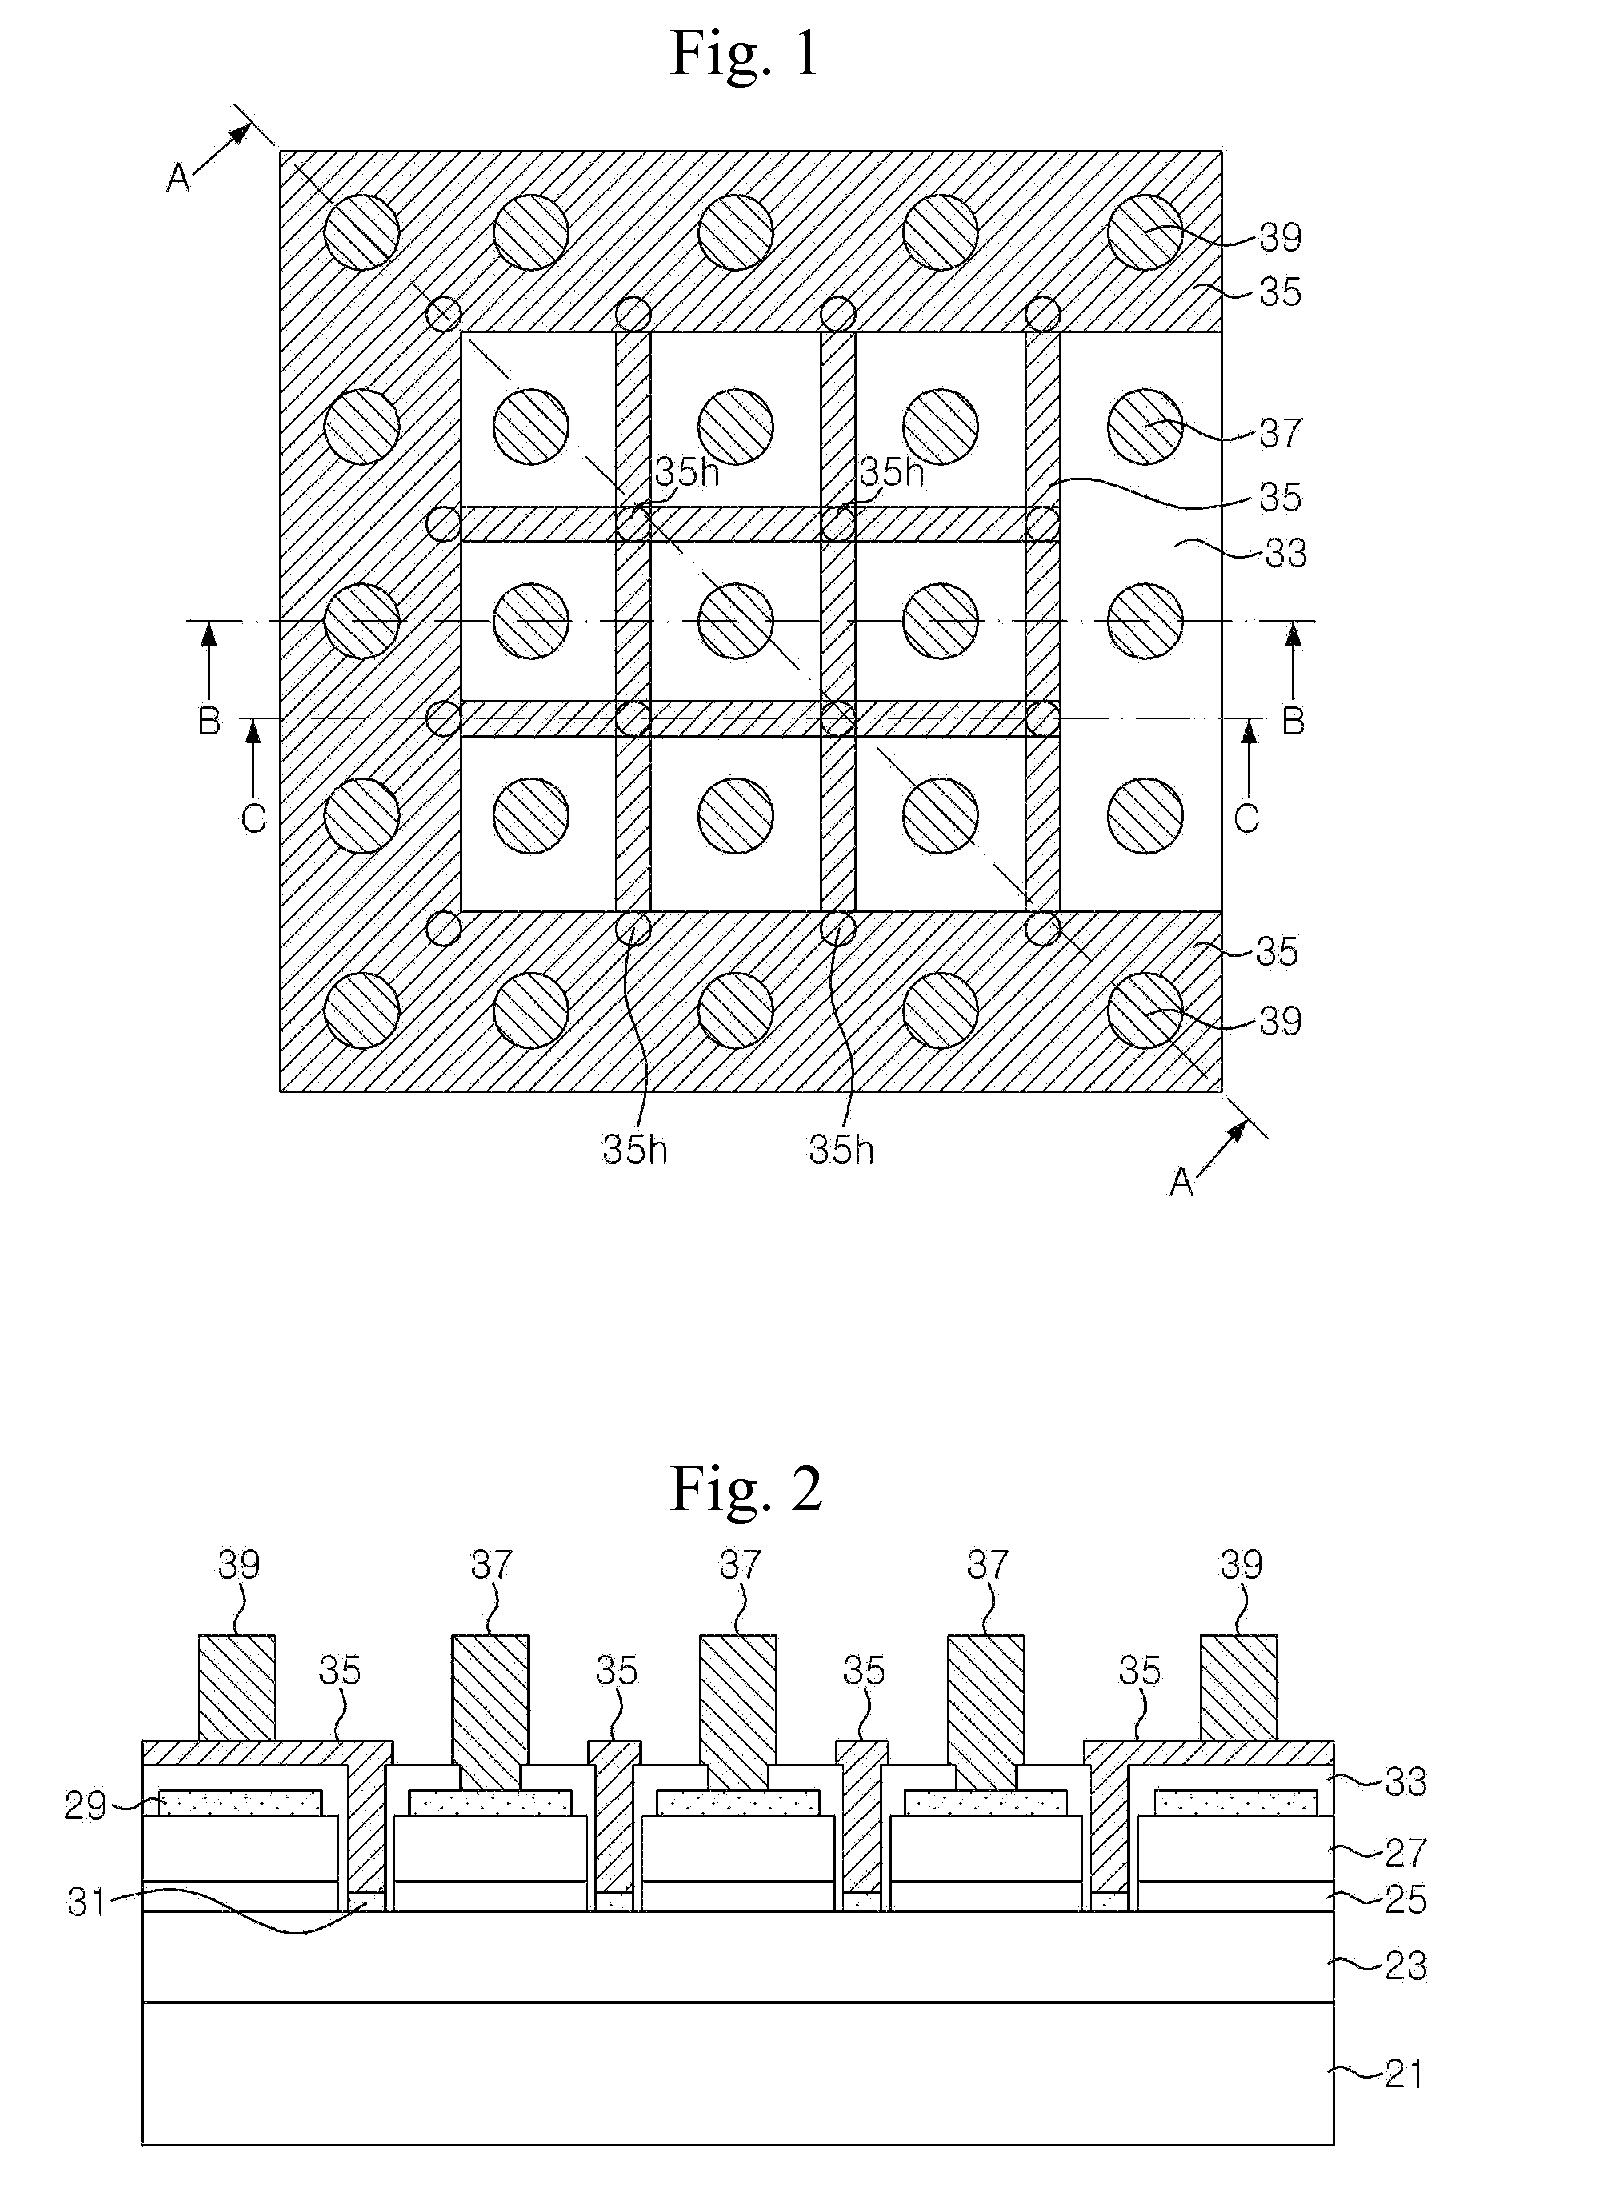 Light emitting diode with improved current spreading performance